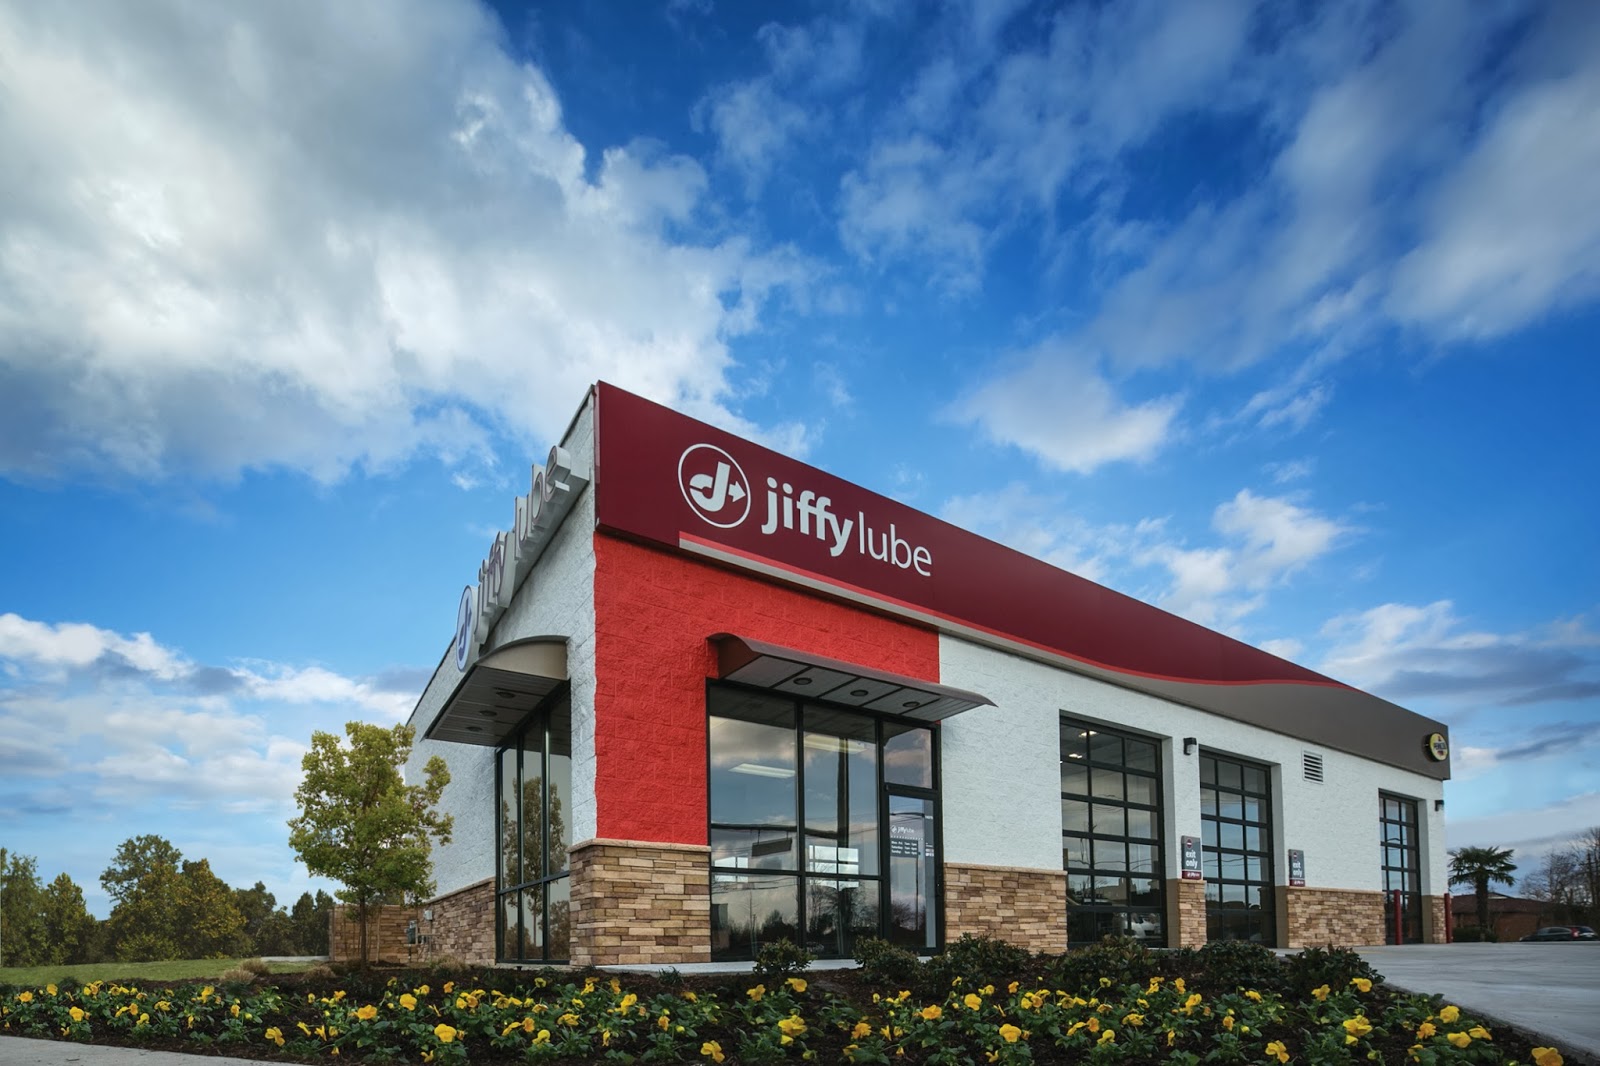 Net leased investment properties 2 - Jiffy Lube